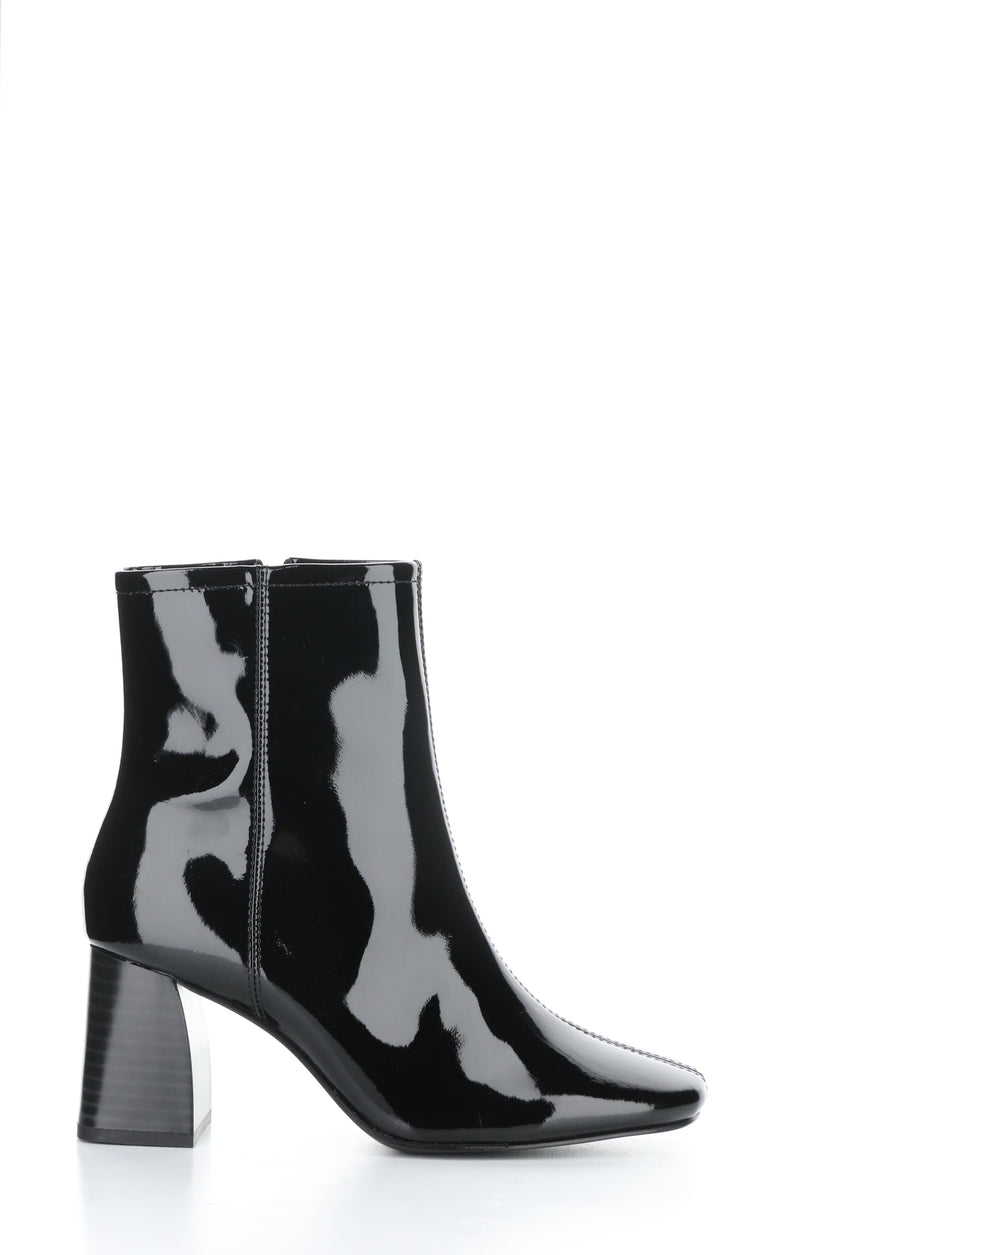 TAGUS BLACK Pointed Toe Boots